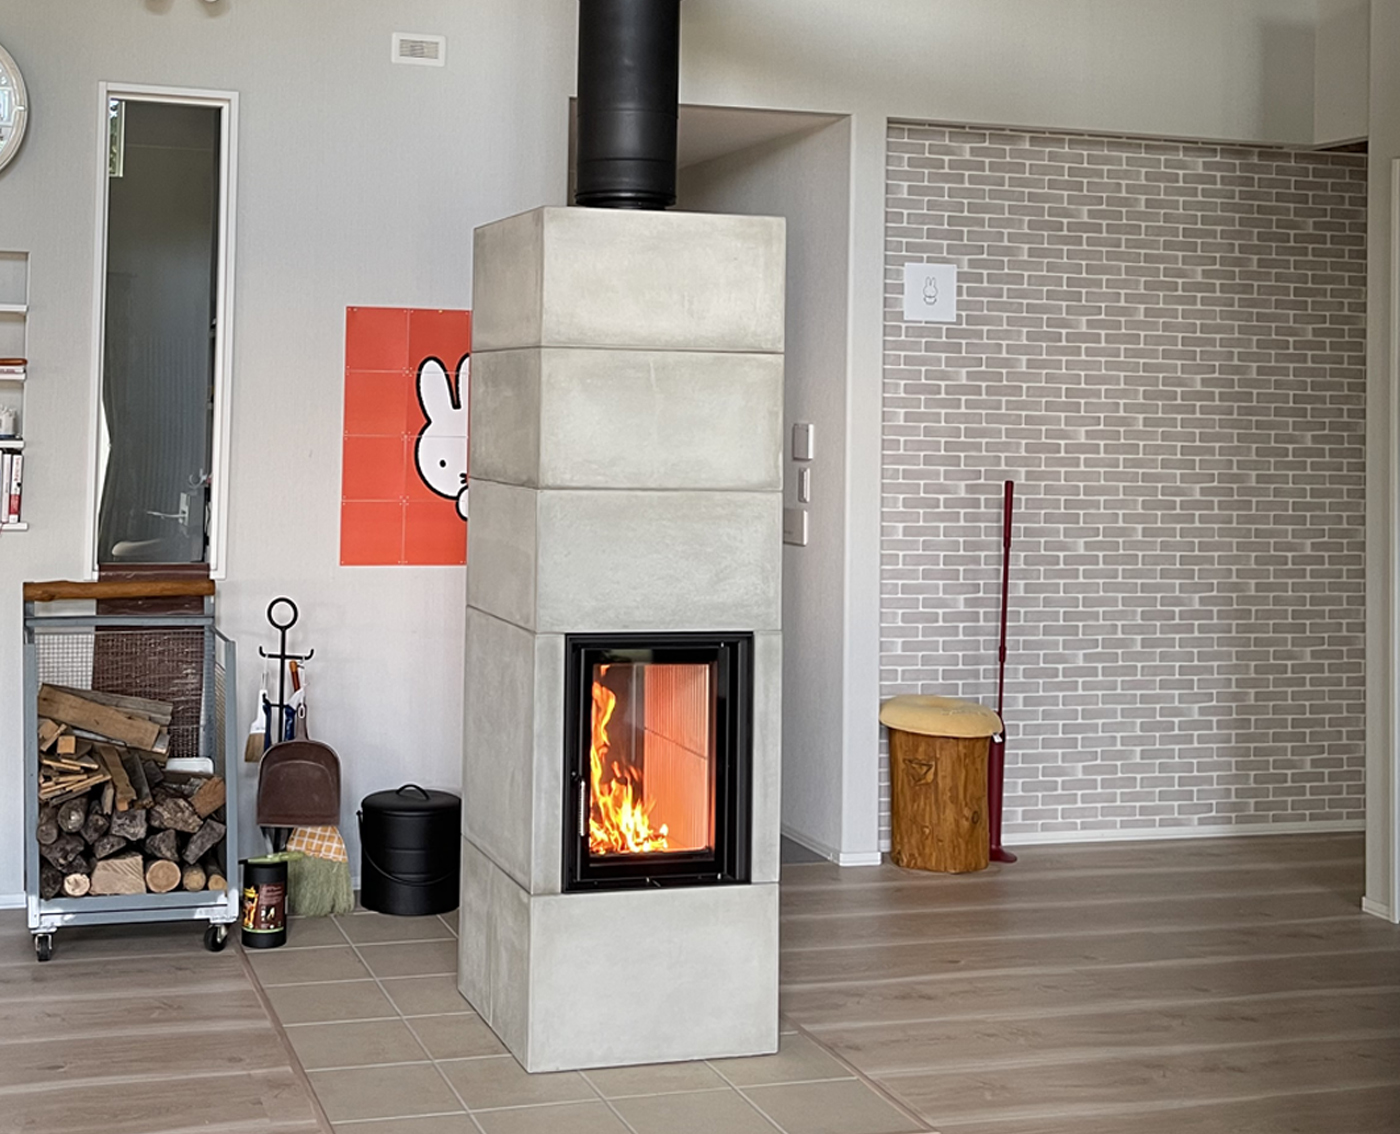 BRUNNER　System stove BSO